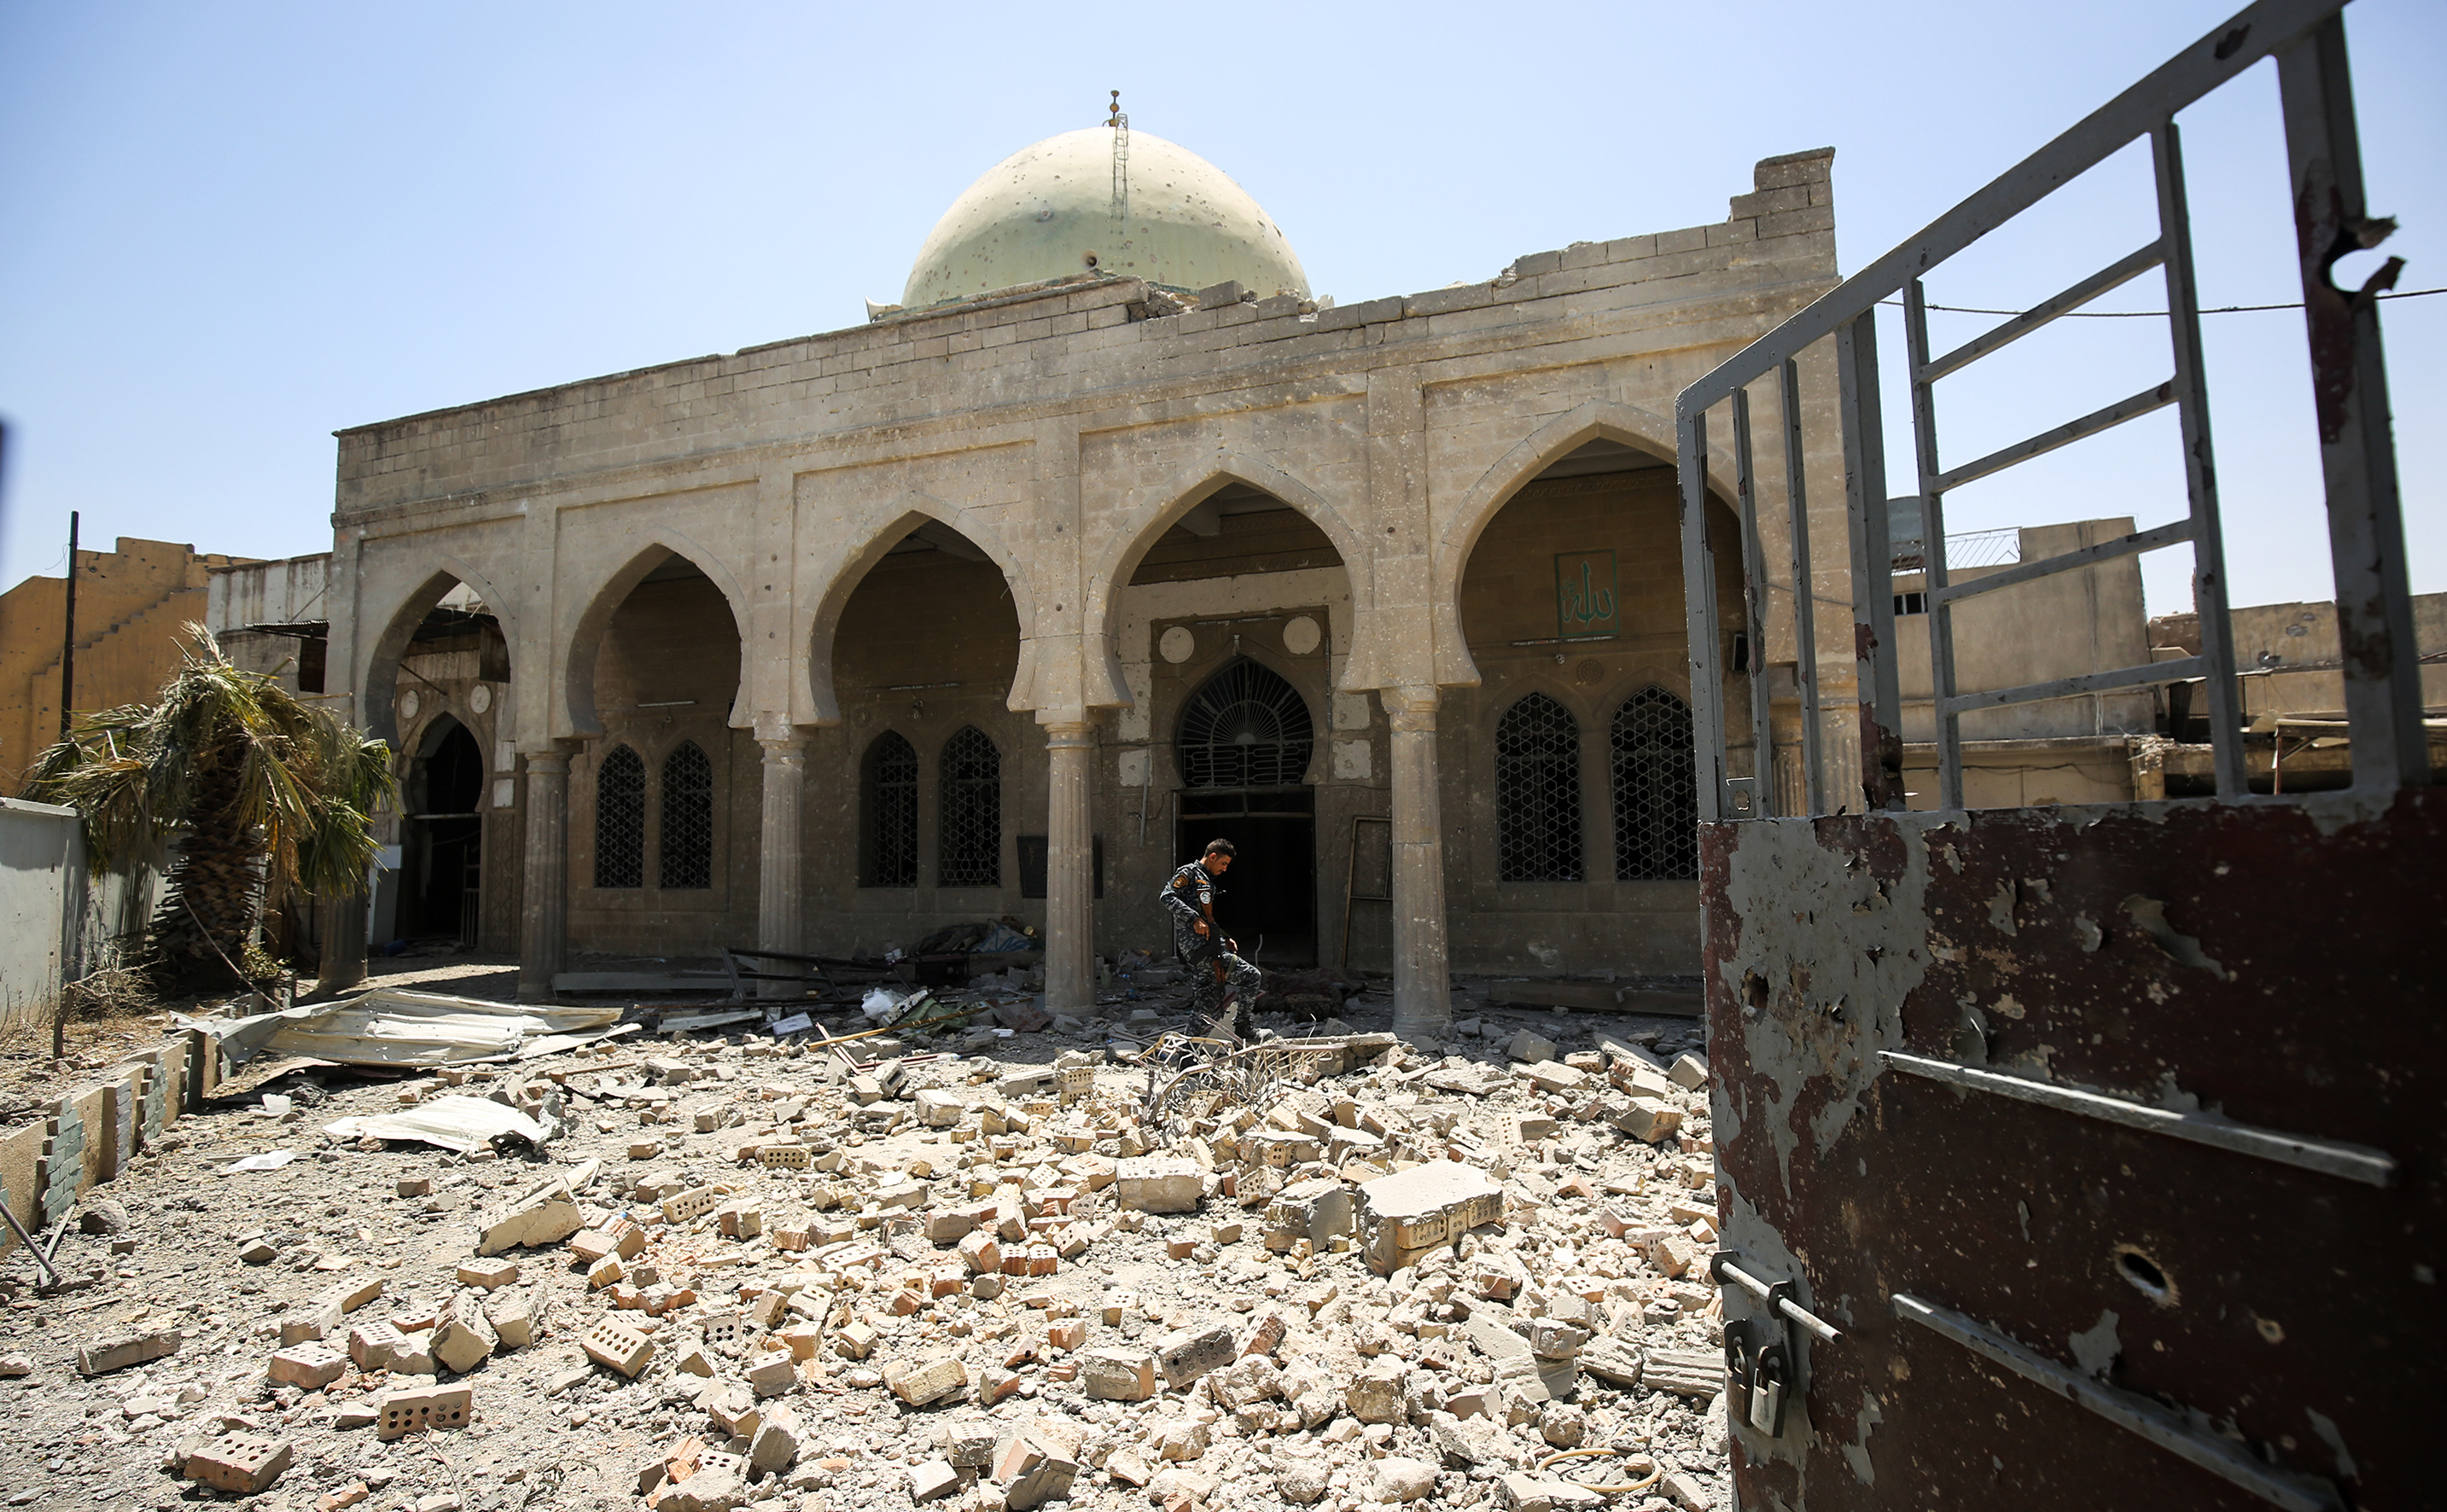 A member of the Iraqi federal police walks through the rubble in the grounds outside the damaged historic 19th century Ziwani mosque in the Old City of Mosul on June 28, 2017, as Iraqi forces inspect damage the building sustained during the offensive to retake the last remaining district from Islamic State (IS) group fighters. (AHMAD AL-RUBAYE—AFP/Getty Images)